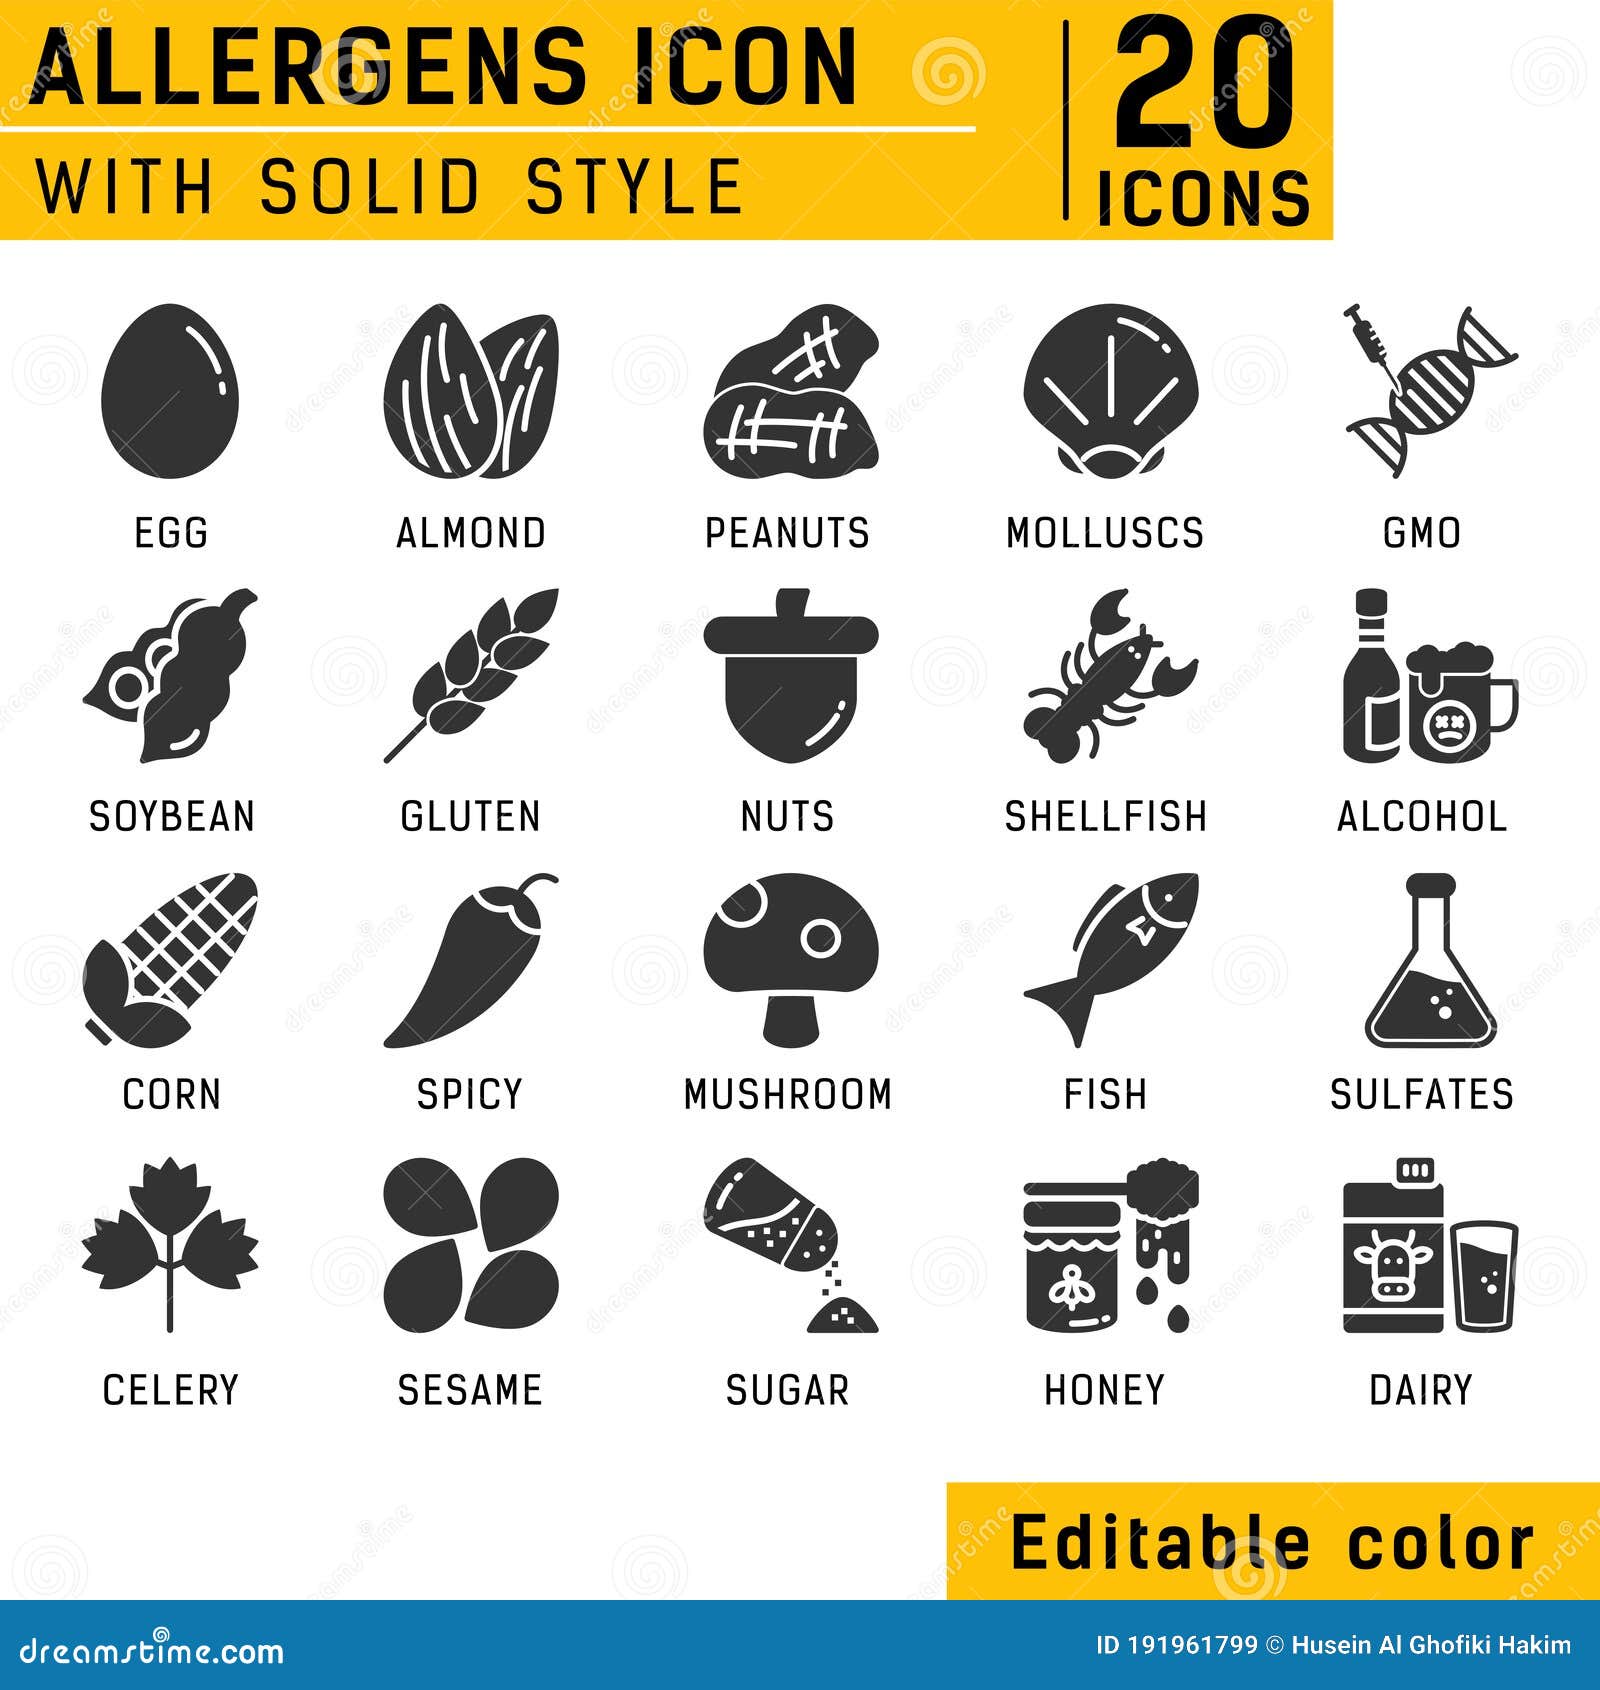 allergens solid icons  set.  on white background. allergens icon with solid style